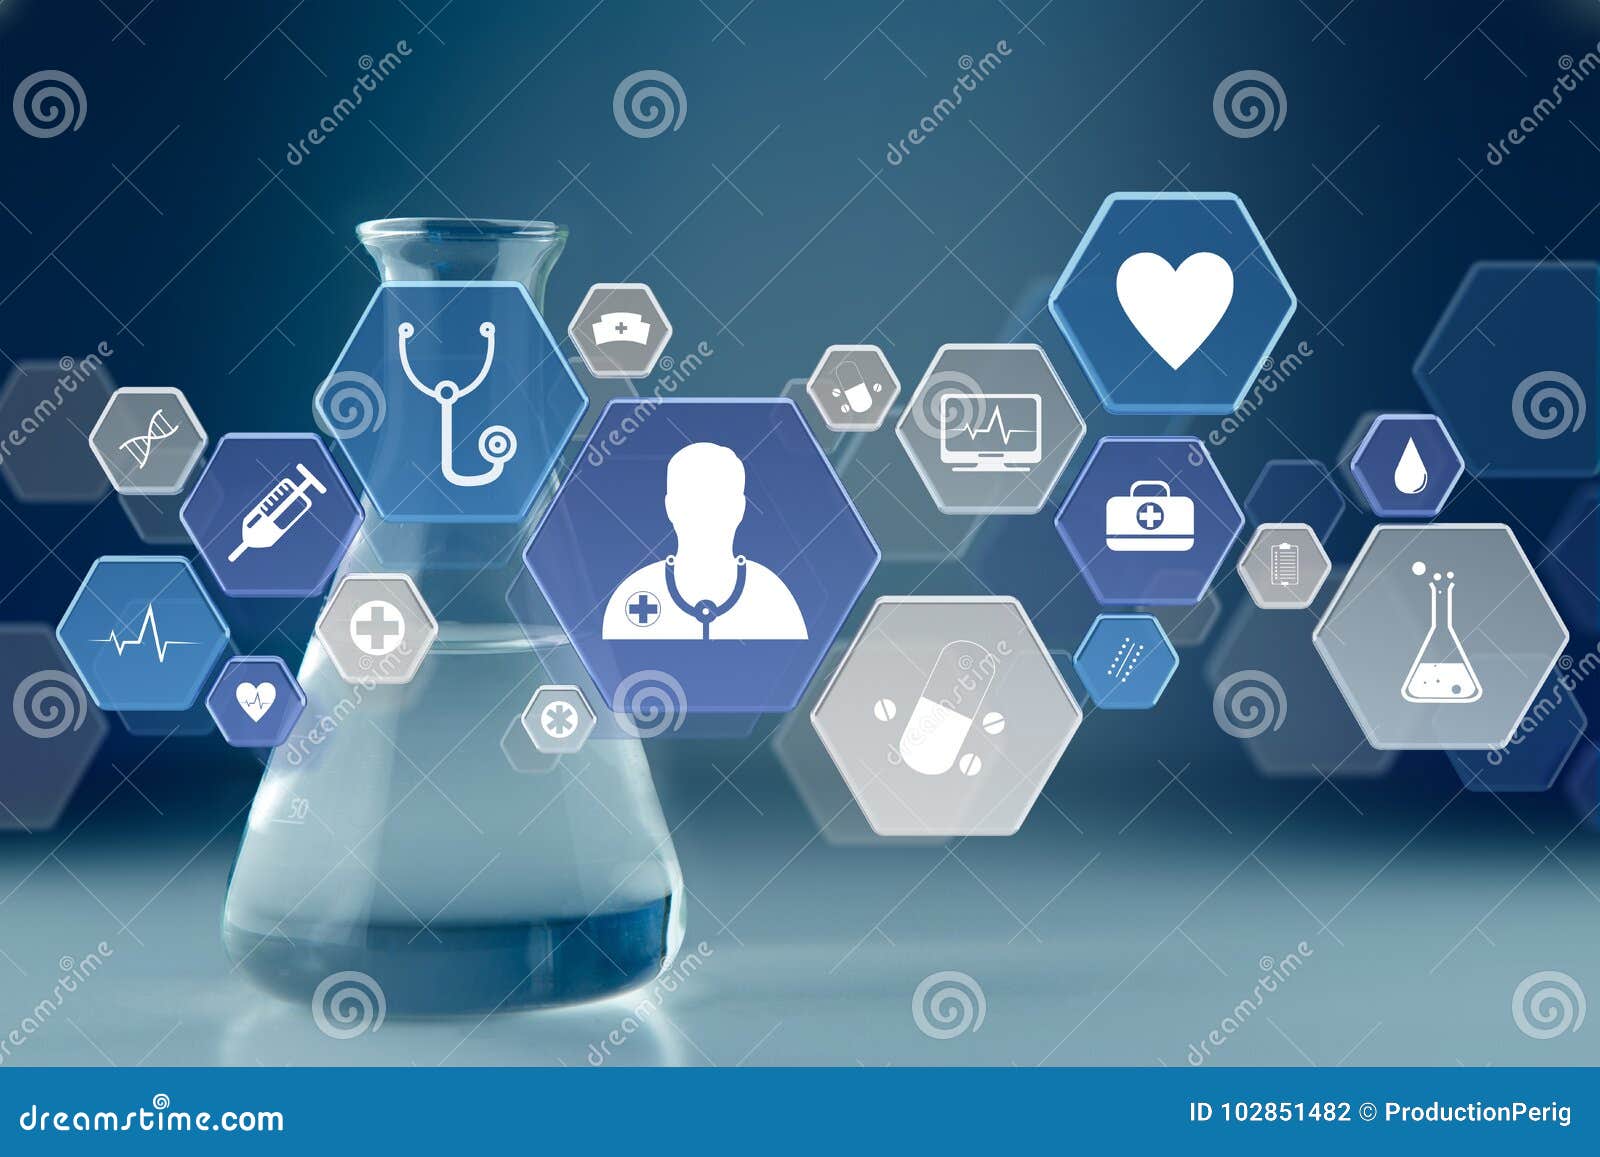 medecine and general healthcare icon displayed on a medical interface